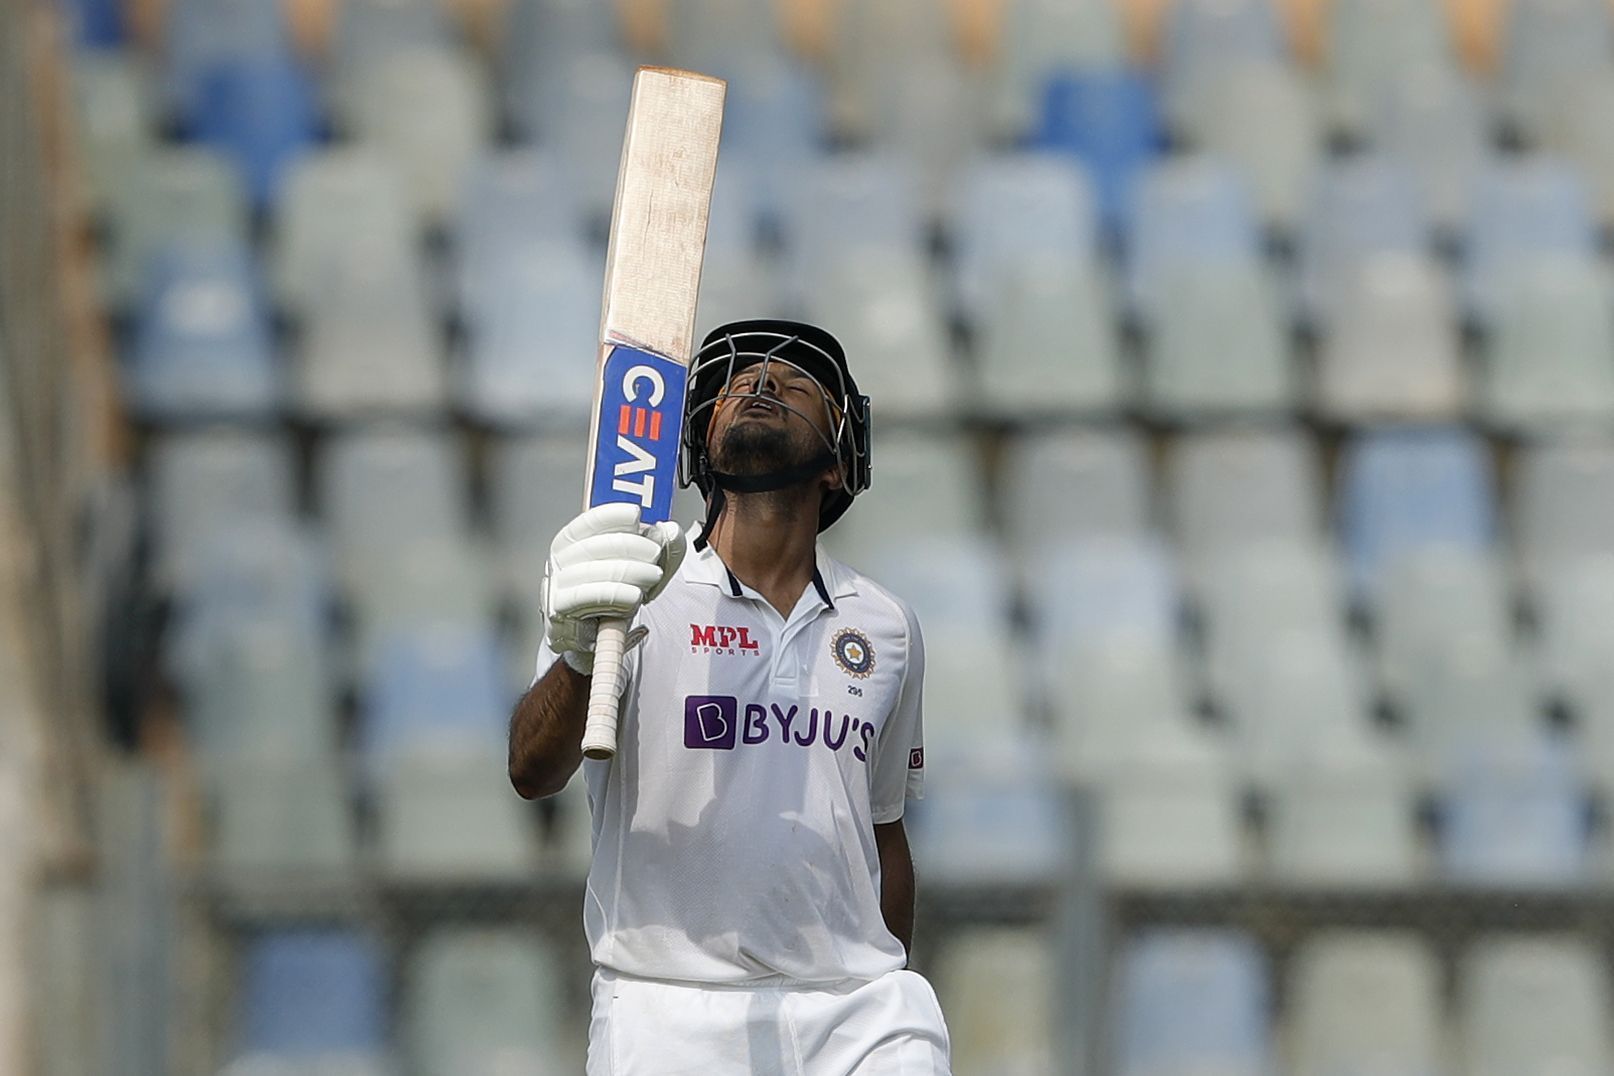 &lt;a href=&#039;https://www.sportskeeda.com/player/mayank-agarwal&#039; target=&#039;_blank&#039; rel=&#039;noopener noreferrer&#039;&gt;Mayank&lt;/a&gt; Agarwal has hit 4 hundreds and as many fifties in 16 Tests [Credits: BCCI]